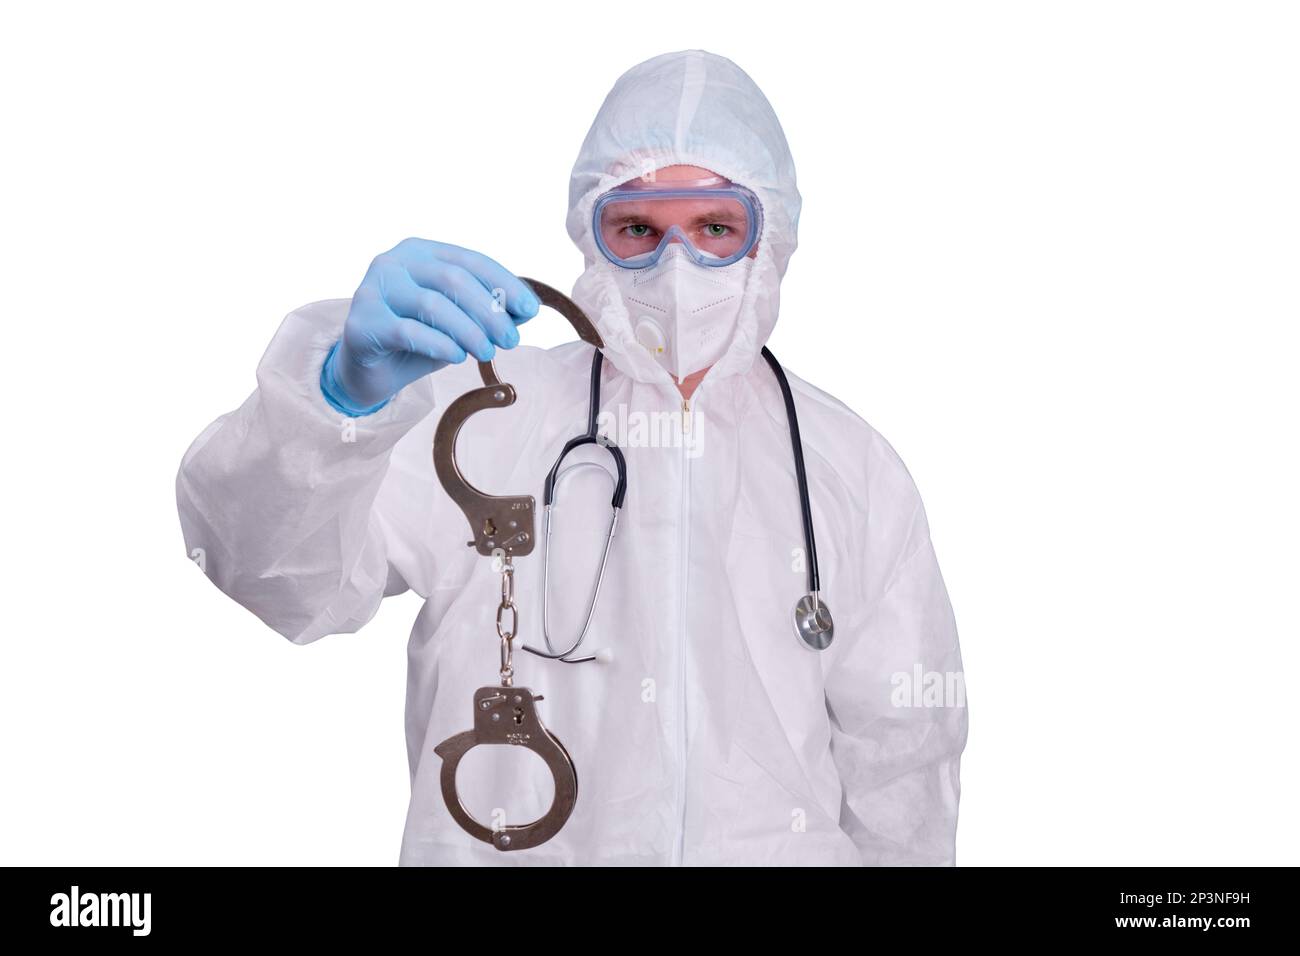 A doctor in a white uniform wearing a medical face mask with handcuffs in his hands, isolated on a white background Stock Photo